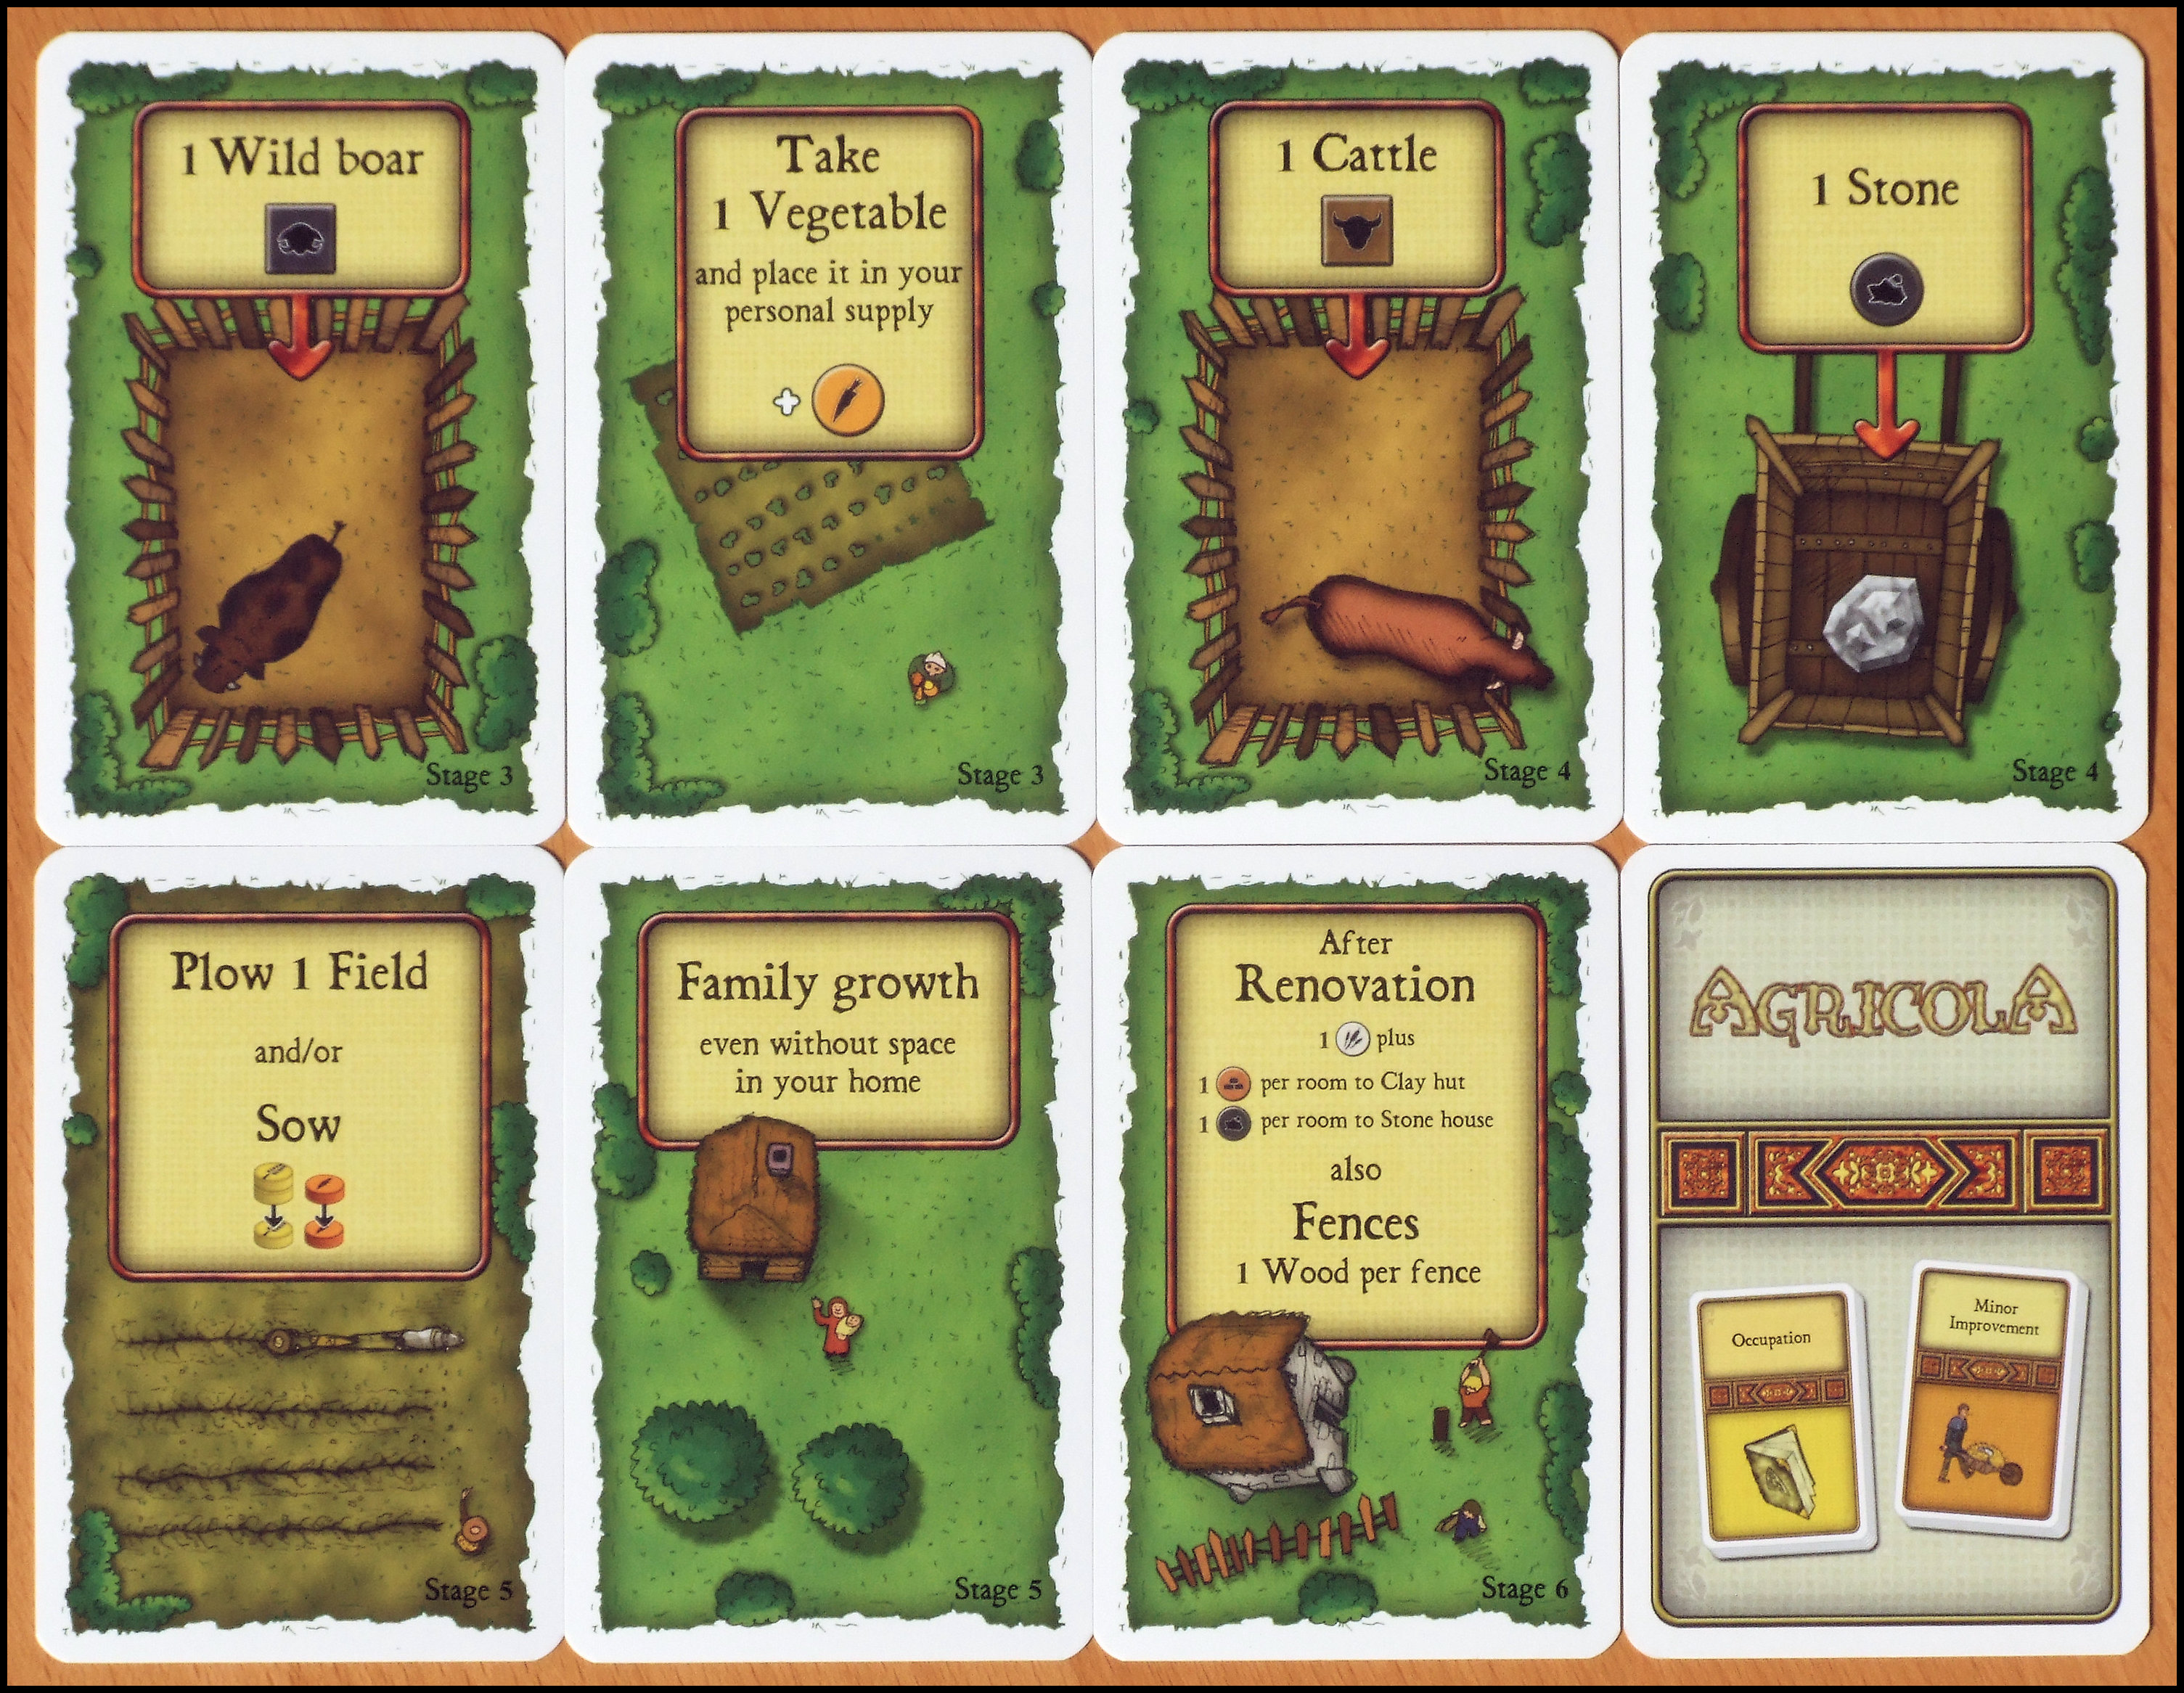 Agricola - Stages 3 To 6 Cards (Z-Man Games Edition)